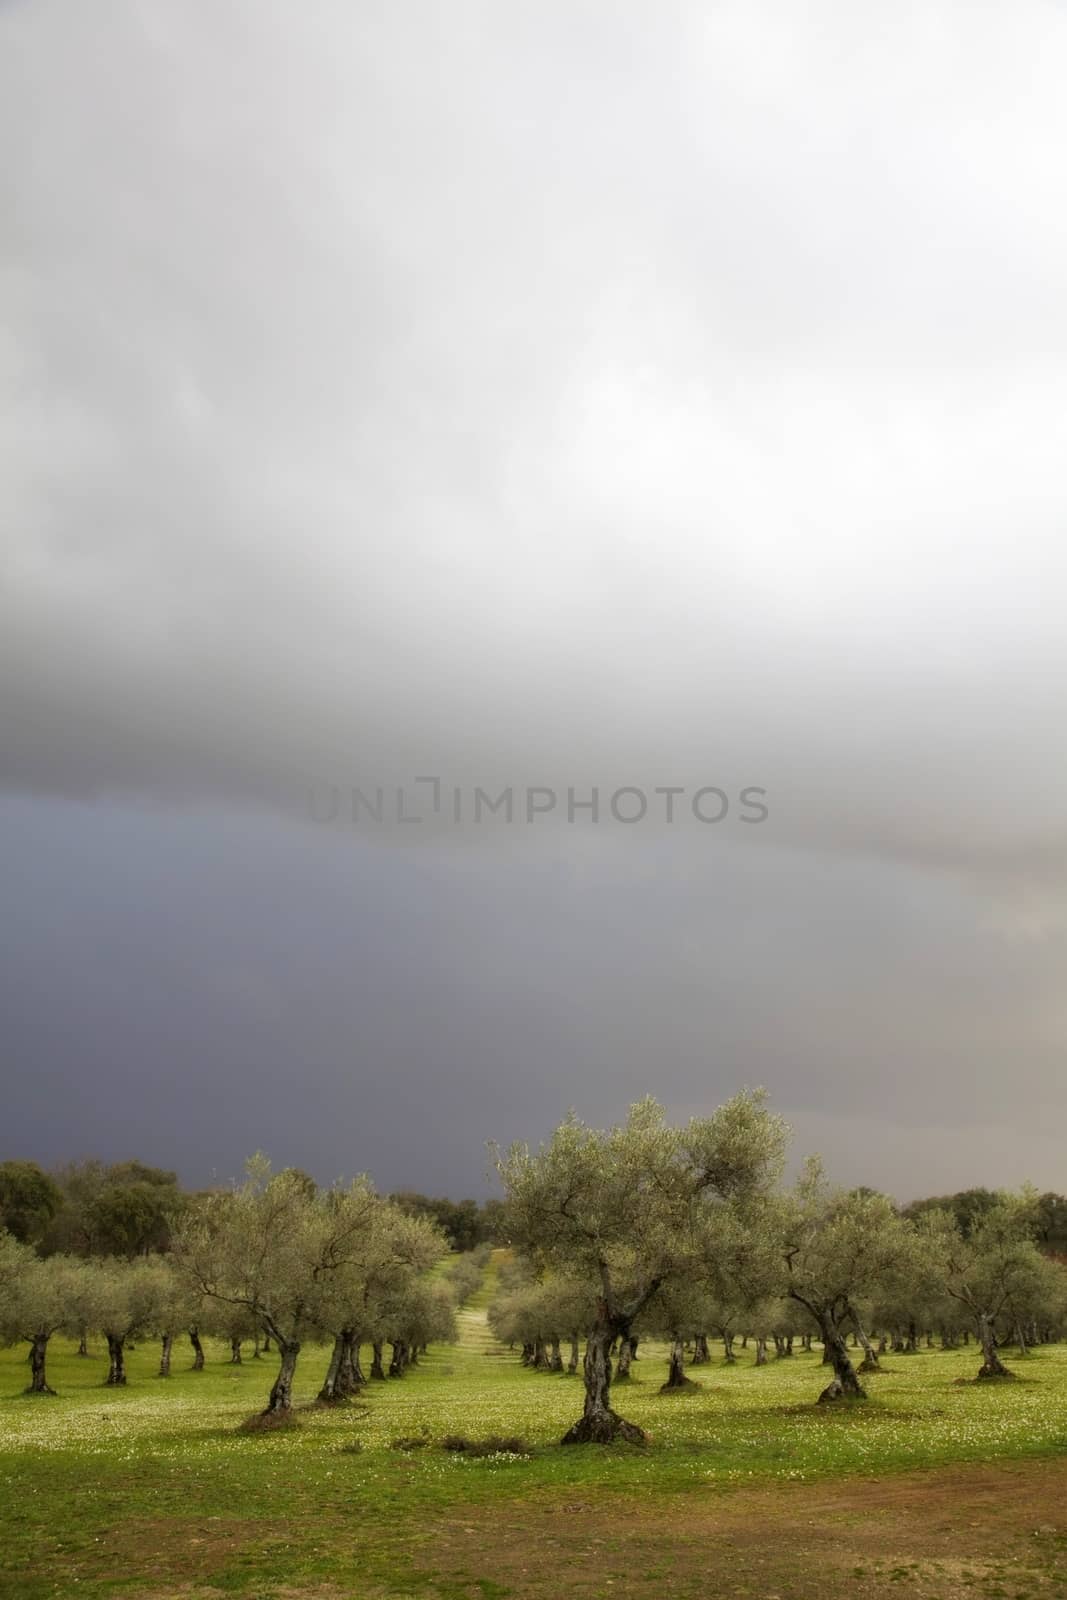 Storm in countryside with olive trees and clouds